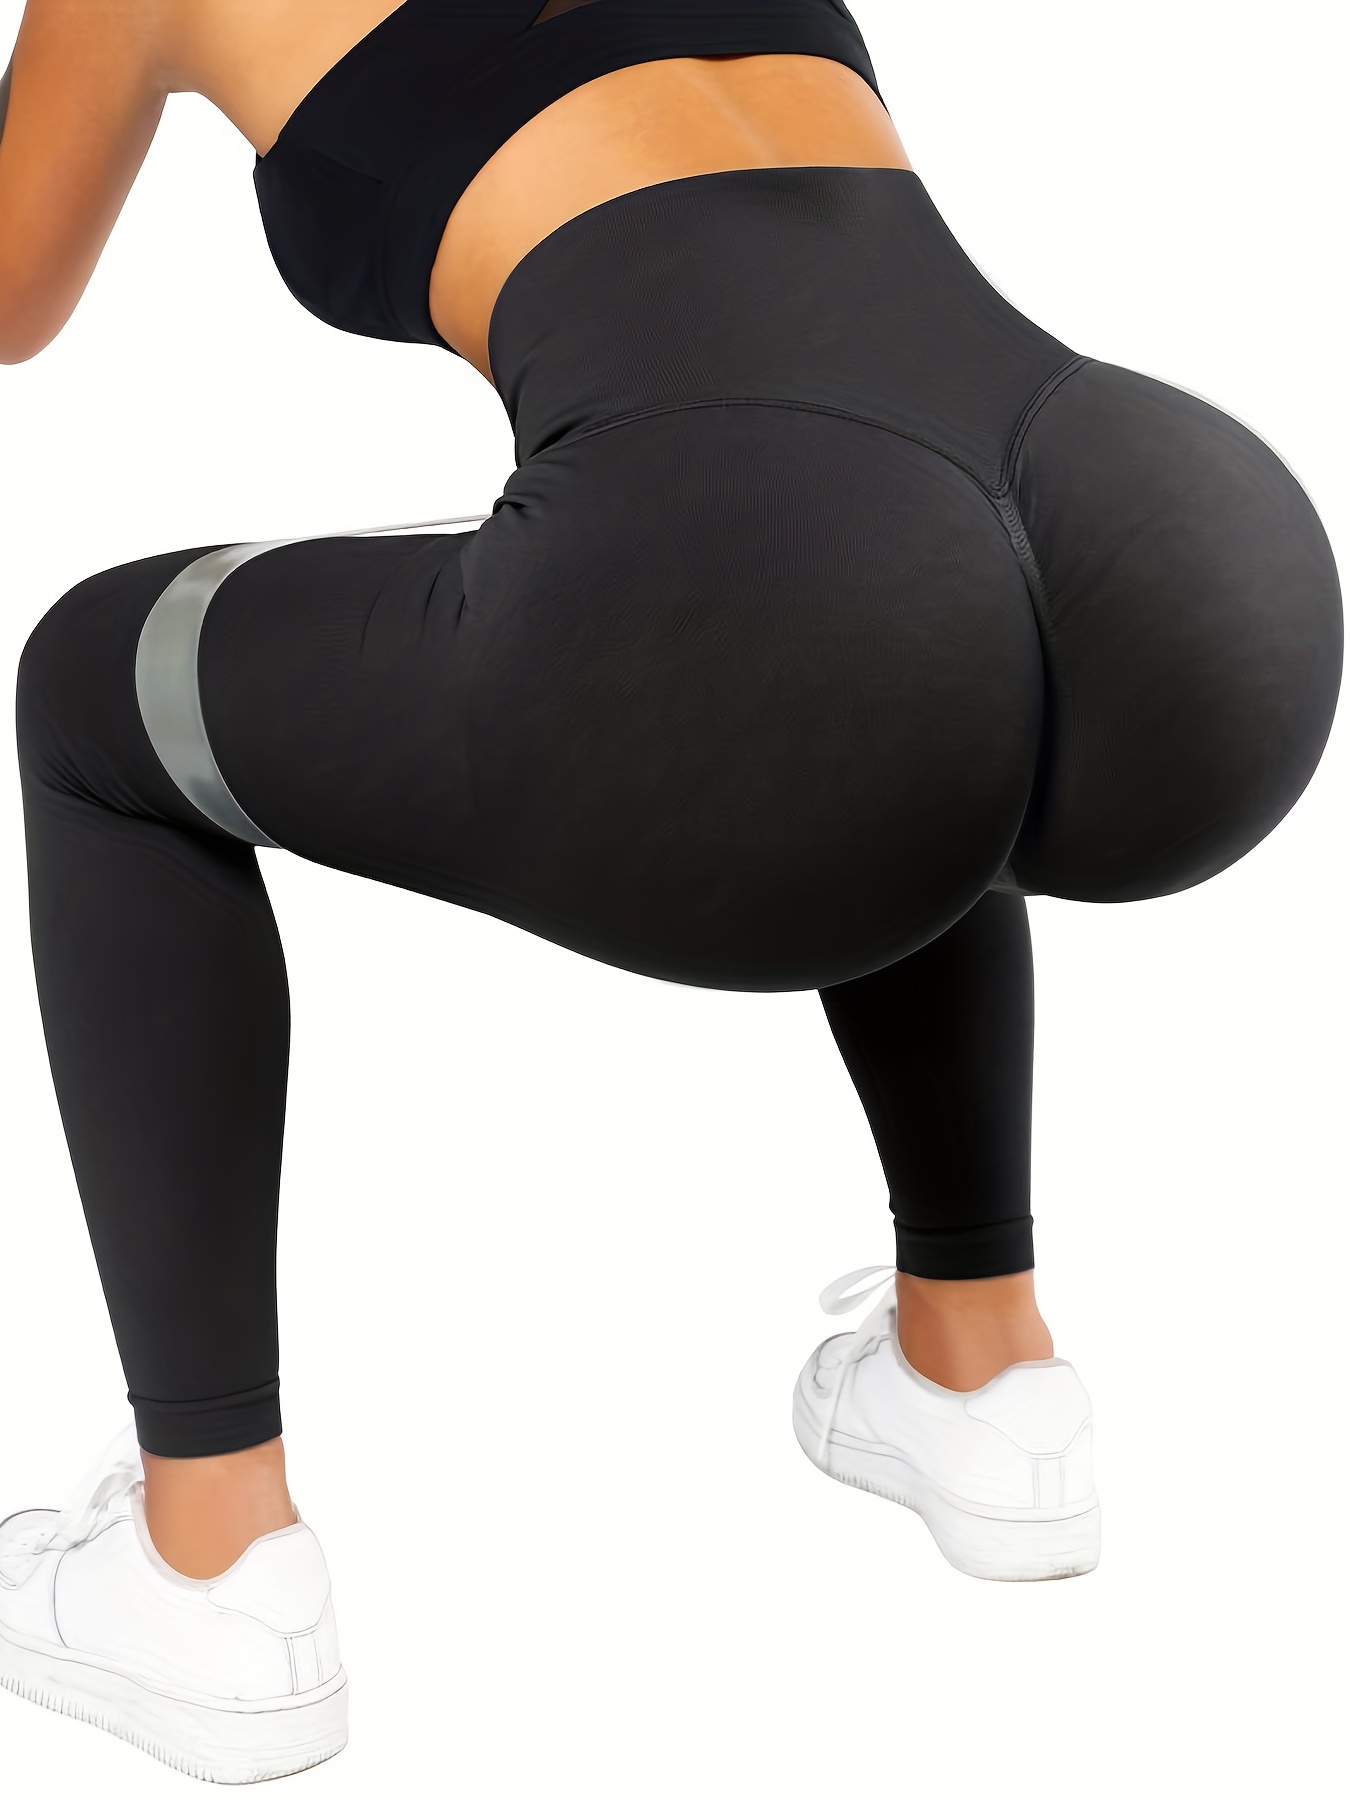 Lily Yoga Leggings for Women Butt Lifting Gym Clothes High Waist